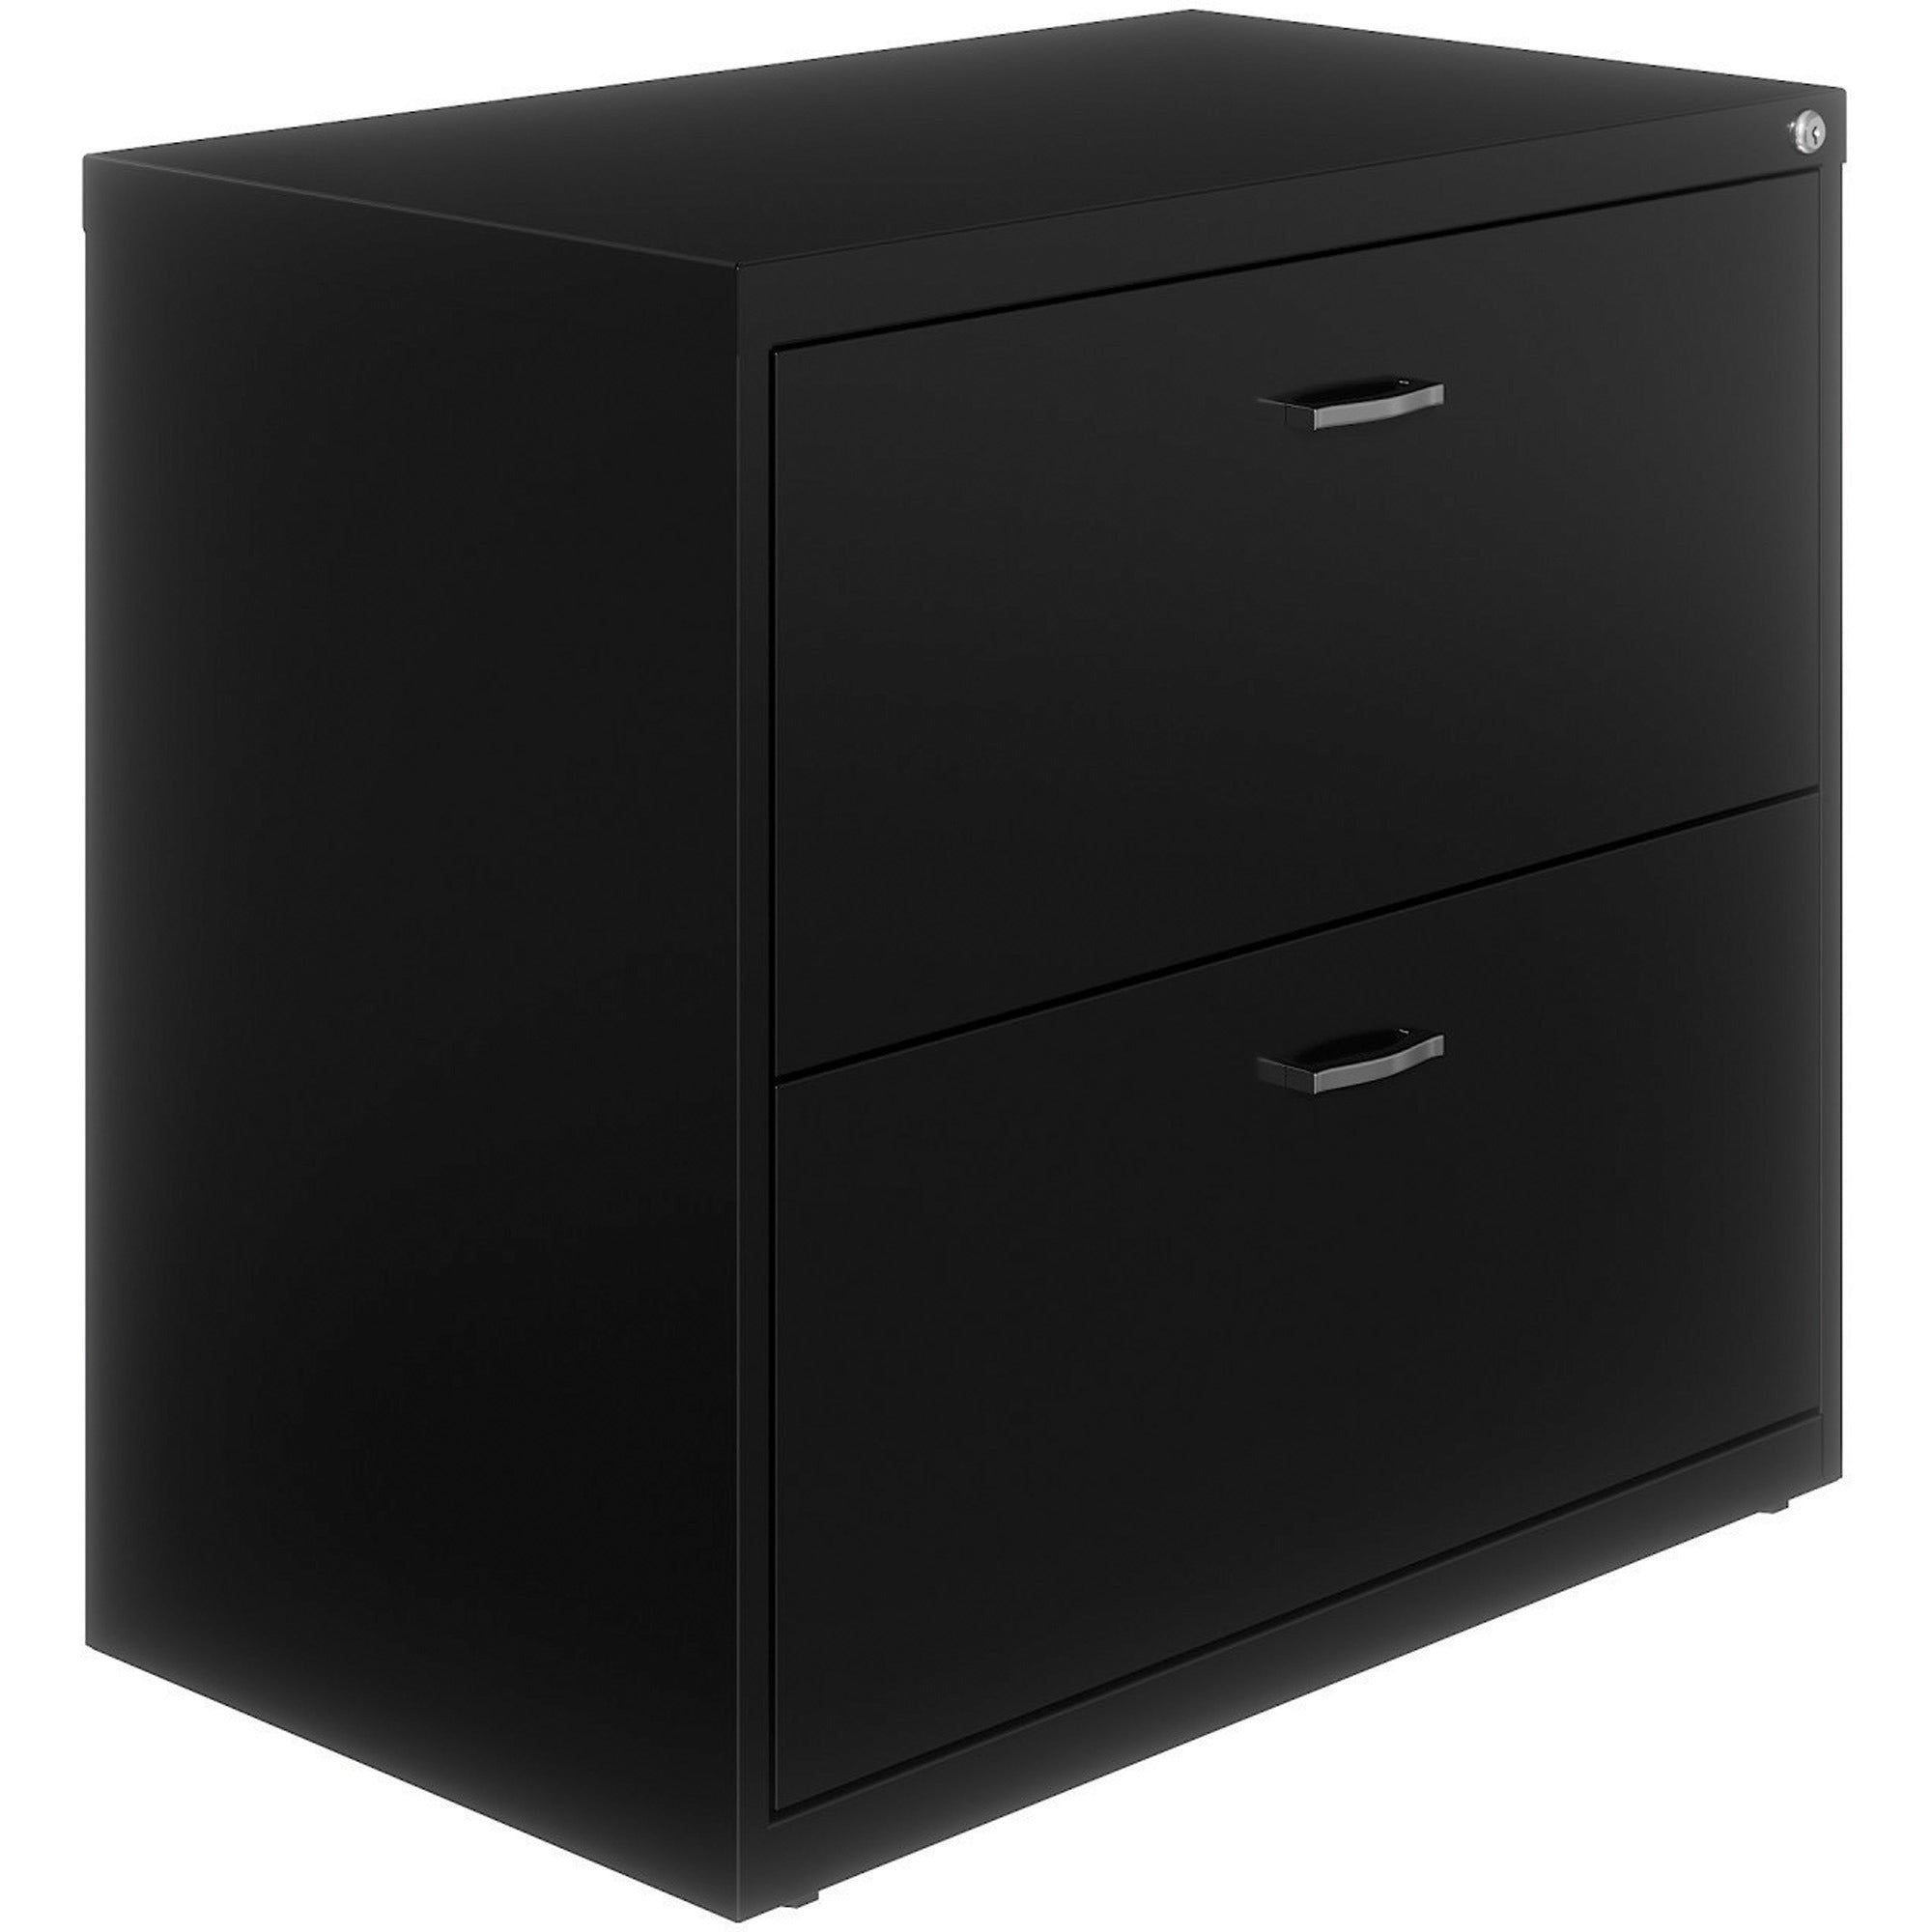 nusparc-2-drawer-lateral-file-30-x-176-x-277-2-x-drawers-for-file-letter-lateral-interlocking-anti-tip-ball-bearing-slide-ball-bearing-suspension-removable-lock-leveling-glide-adjustable-glide-durable-nonporous-surface-blac_nprlf218aabk - 1